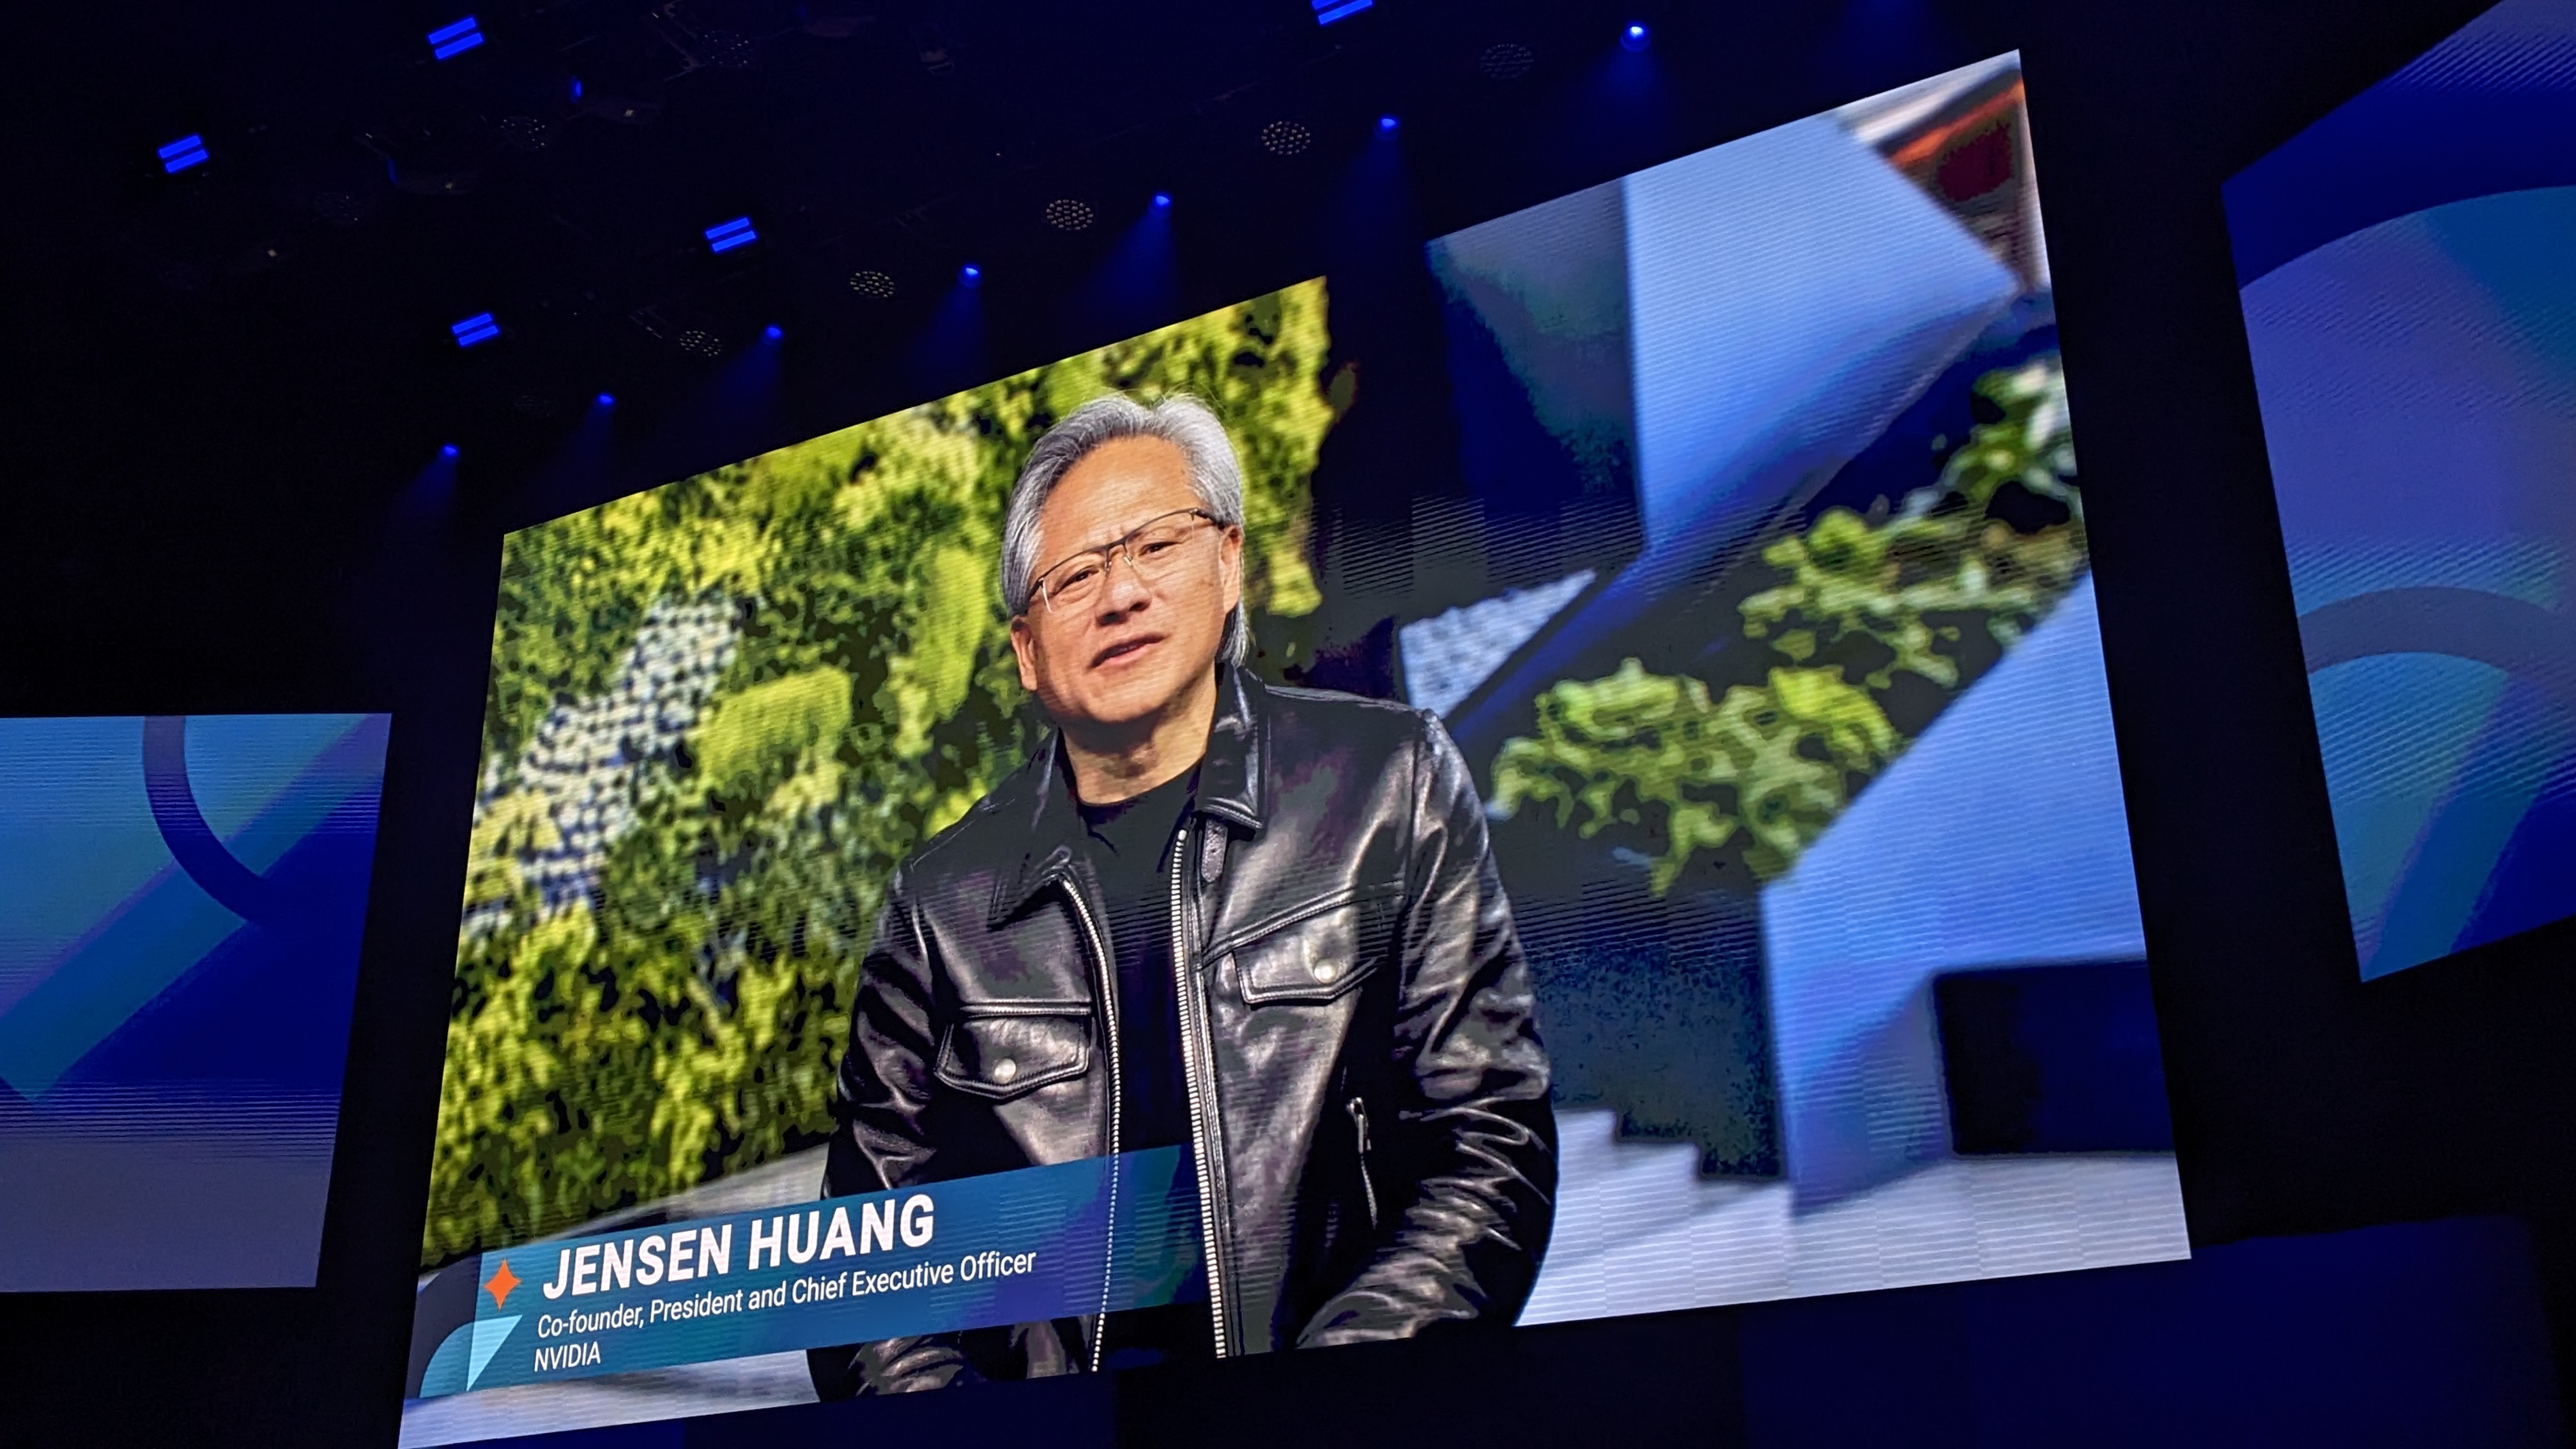 Nvidia CEO Jensen Huang on a large screen